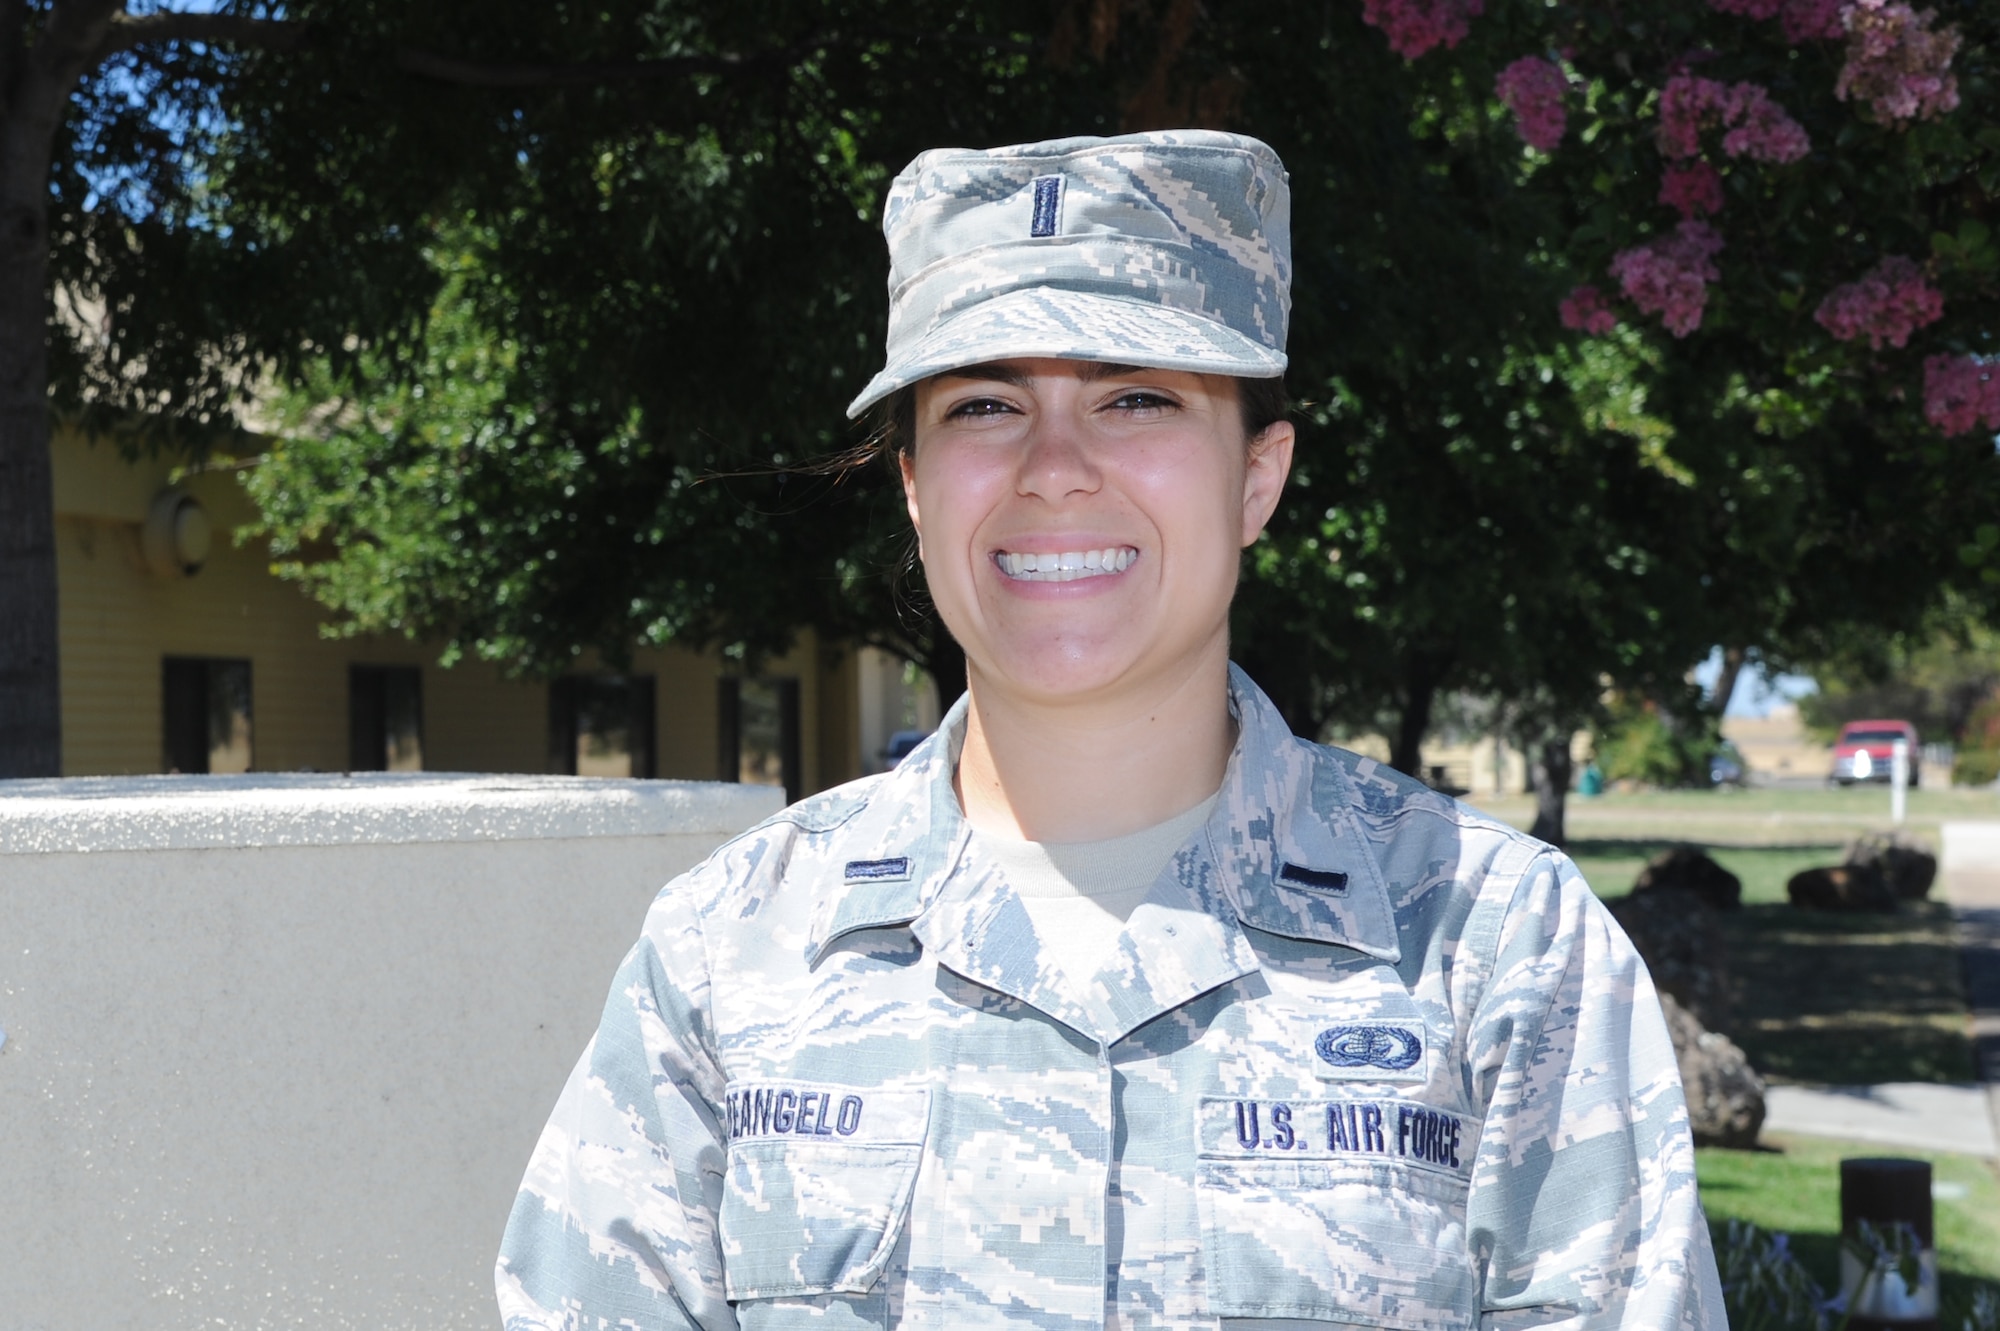 1st Lt. Stephanie DeAngelo, 9th Reconnaissance Wing Chief of Protocol, poses for a photo July 20, 2016, at Beale Air Force Base, California. (U.S. Air Force photo by Senior Airman Tara R. Abrahams)